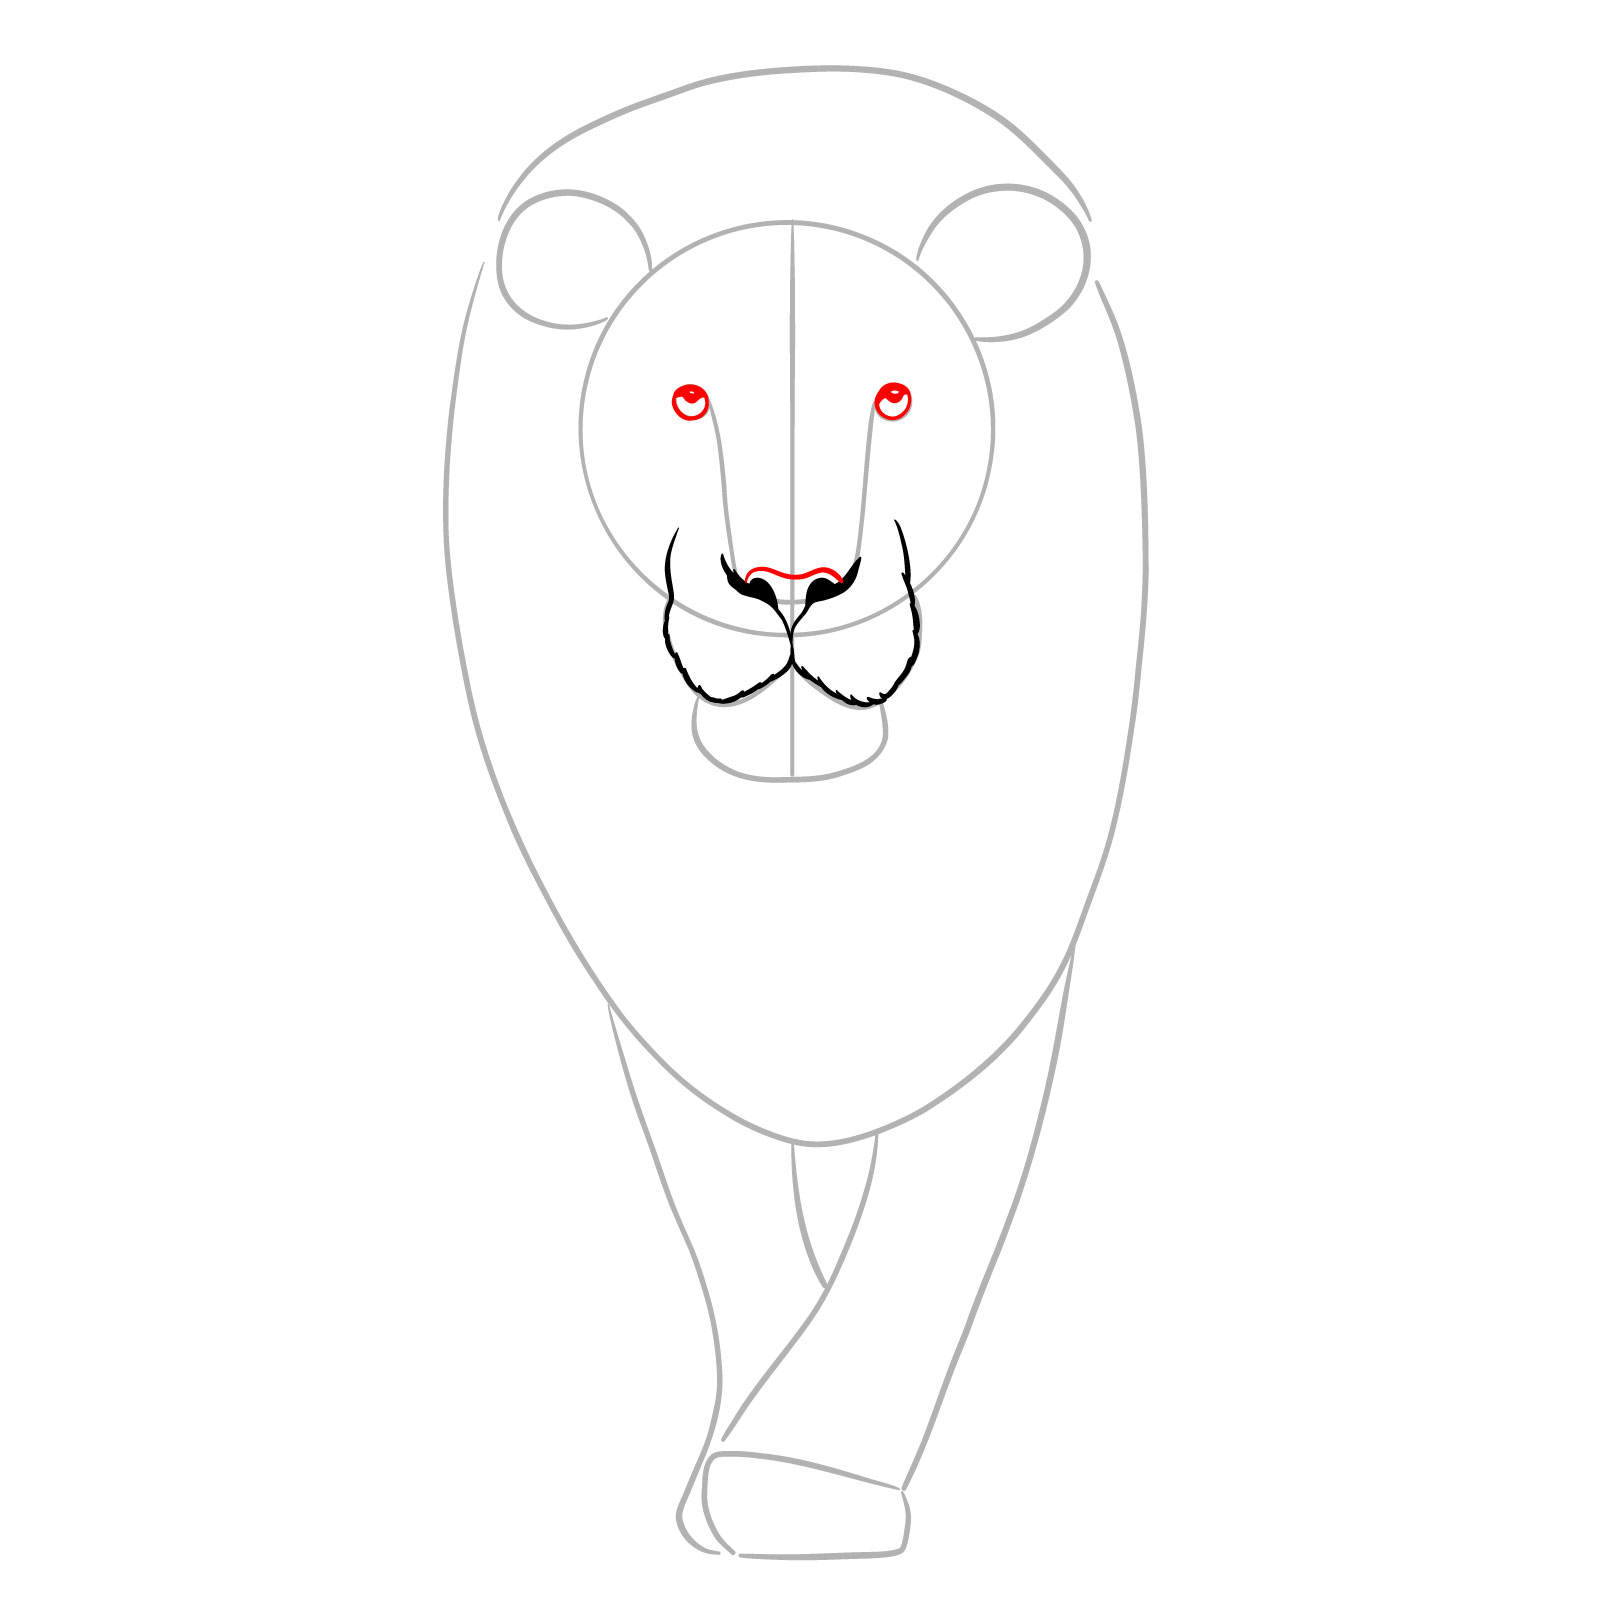 Drawing eyes and the bridge of the nose in a lion's face sketch - step 04